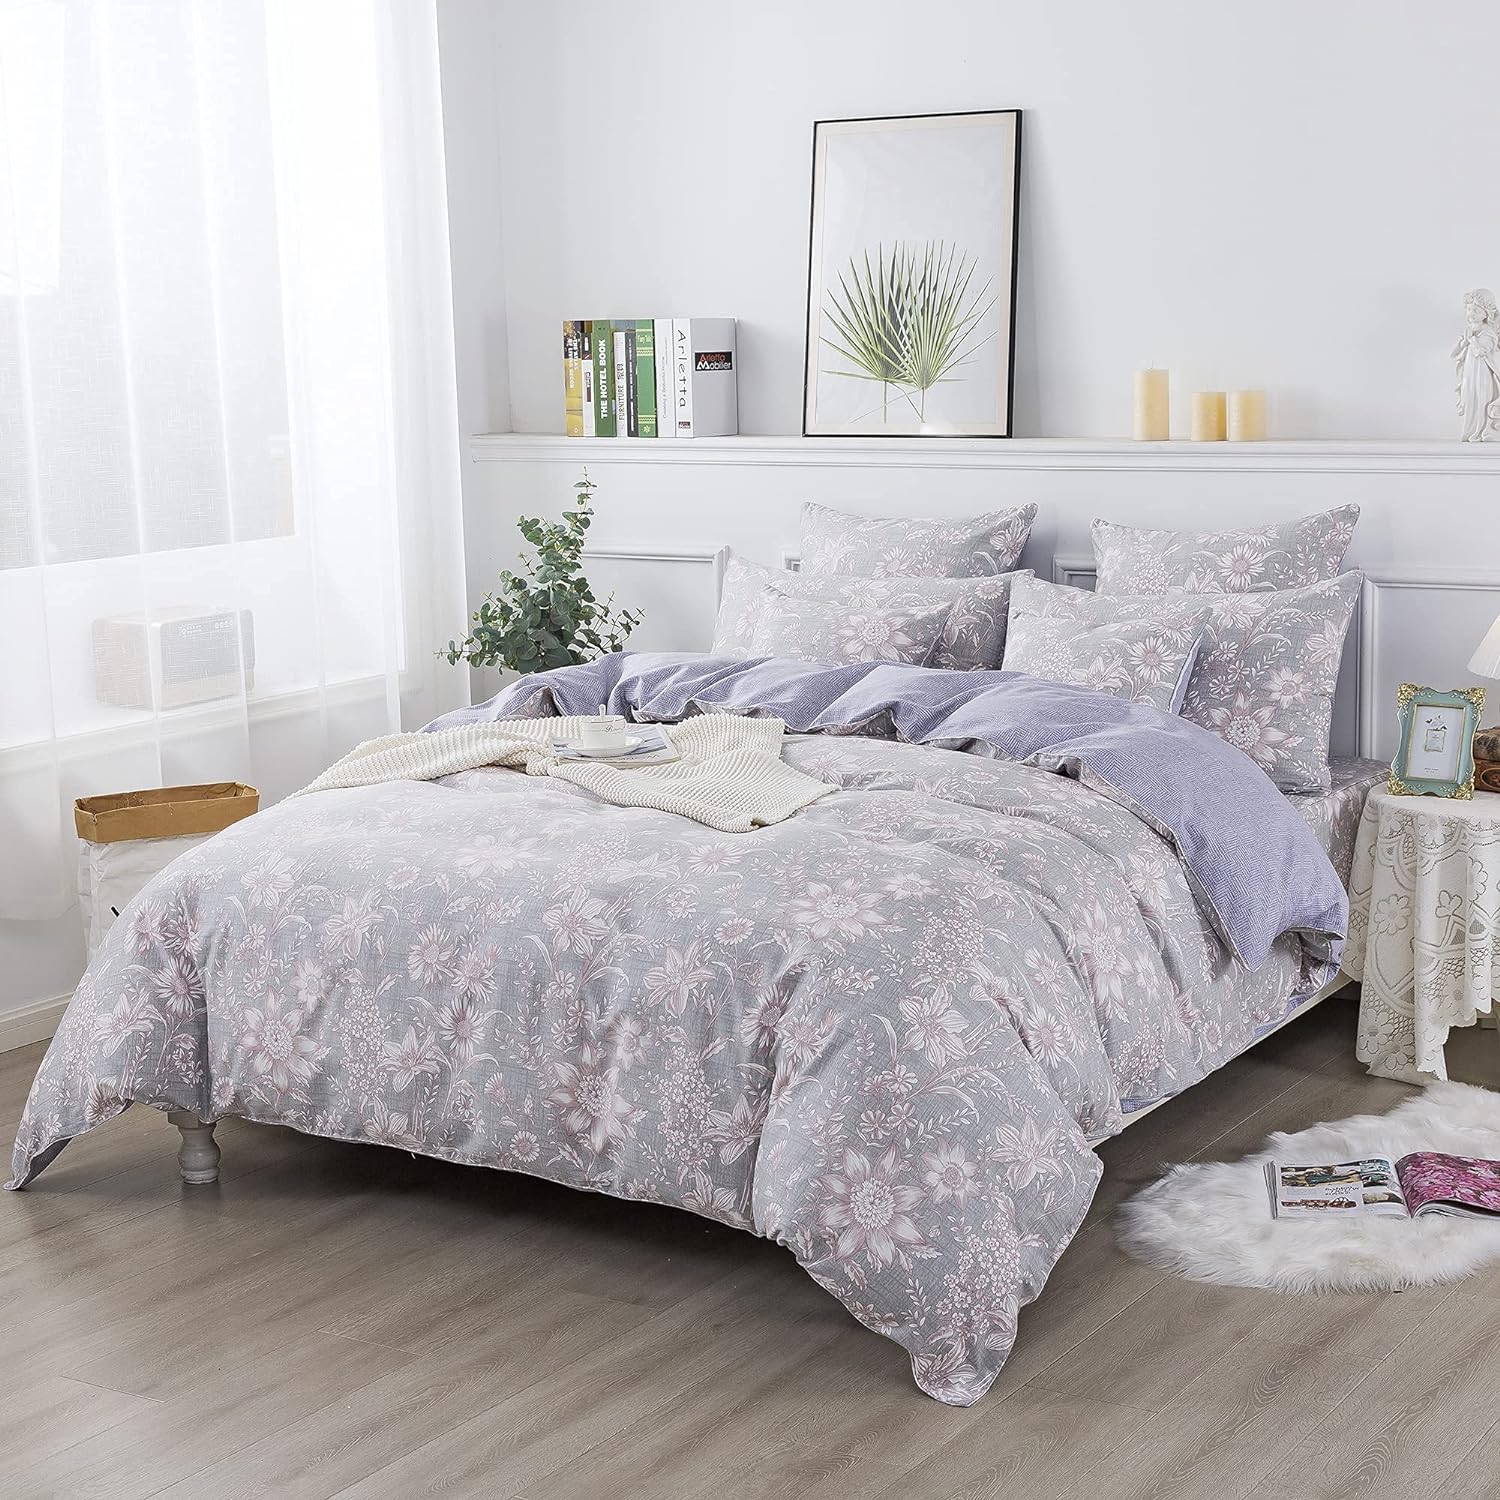 FADFAY Duvet Cover Set Queen Shabby Pink and Grey Floral Bedding Vintage Sunflower Bedding 600TC Elegant Summer Bedding 100% Cotton Soft Comforter Cover with Hidden Zipper Closure 3Pcs, Queen Size